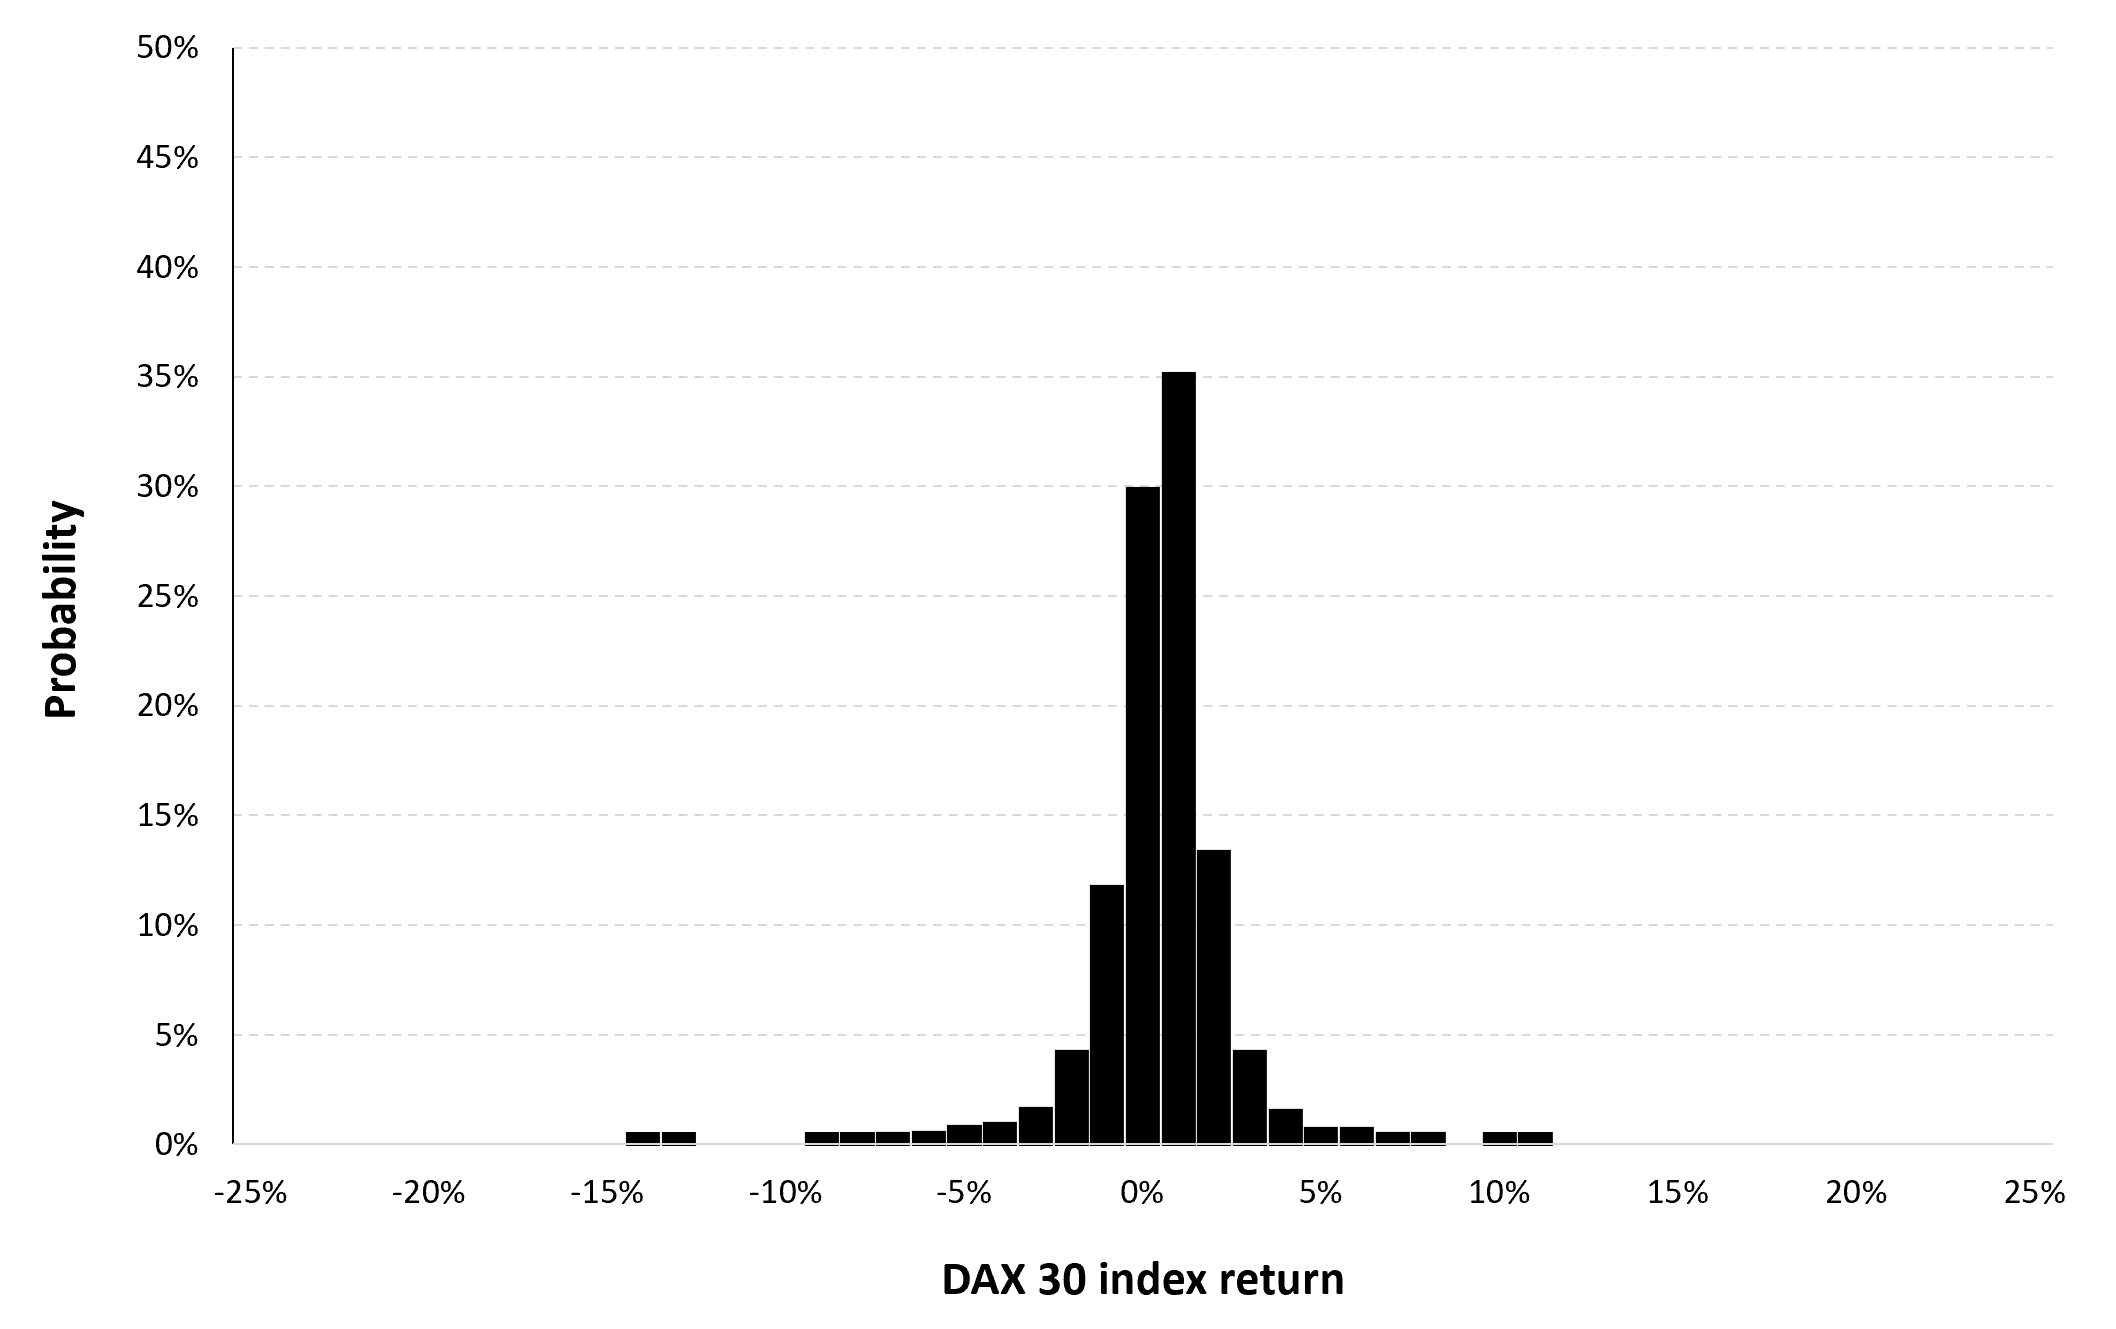 Historical distribution of the daily DAX 30 index returns